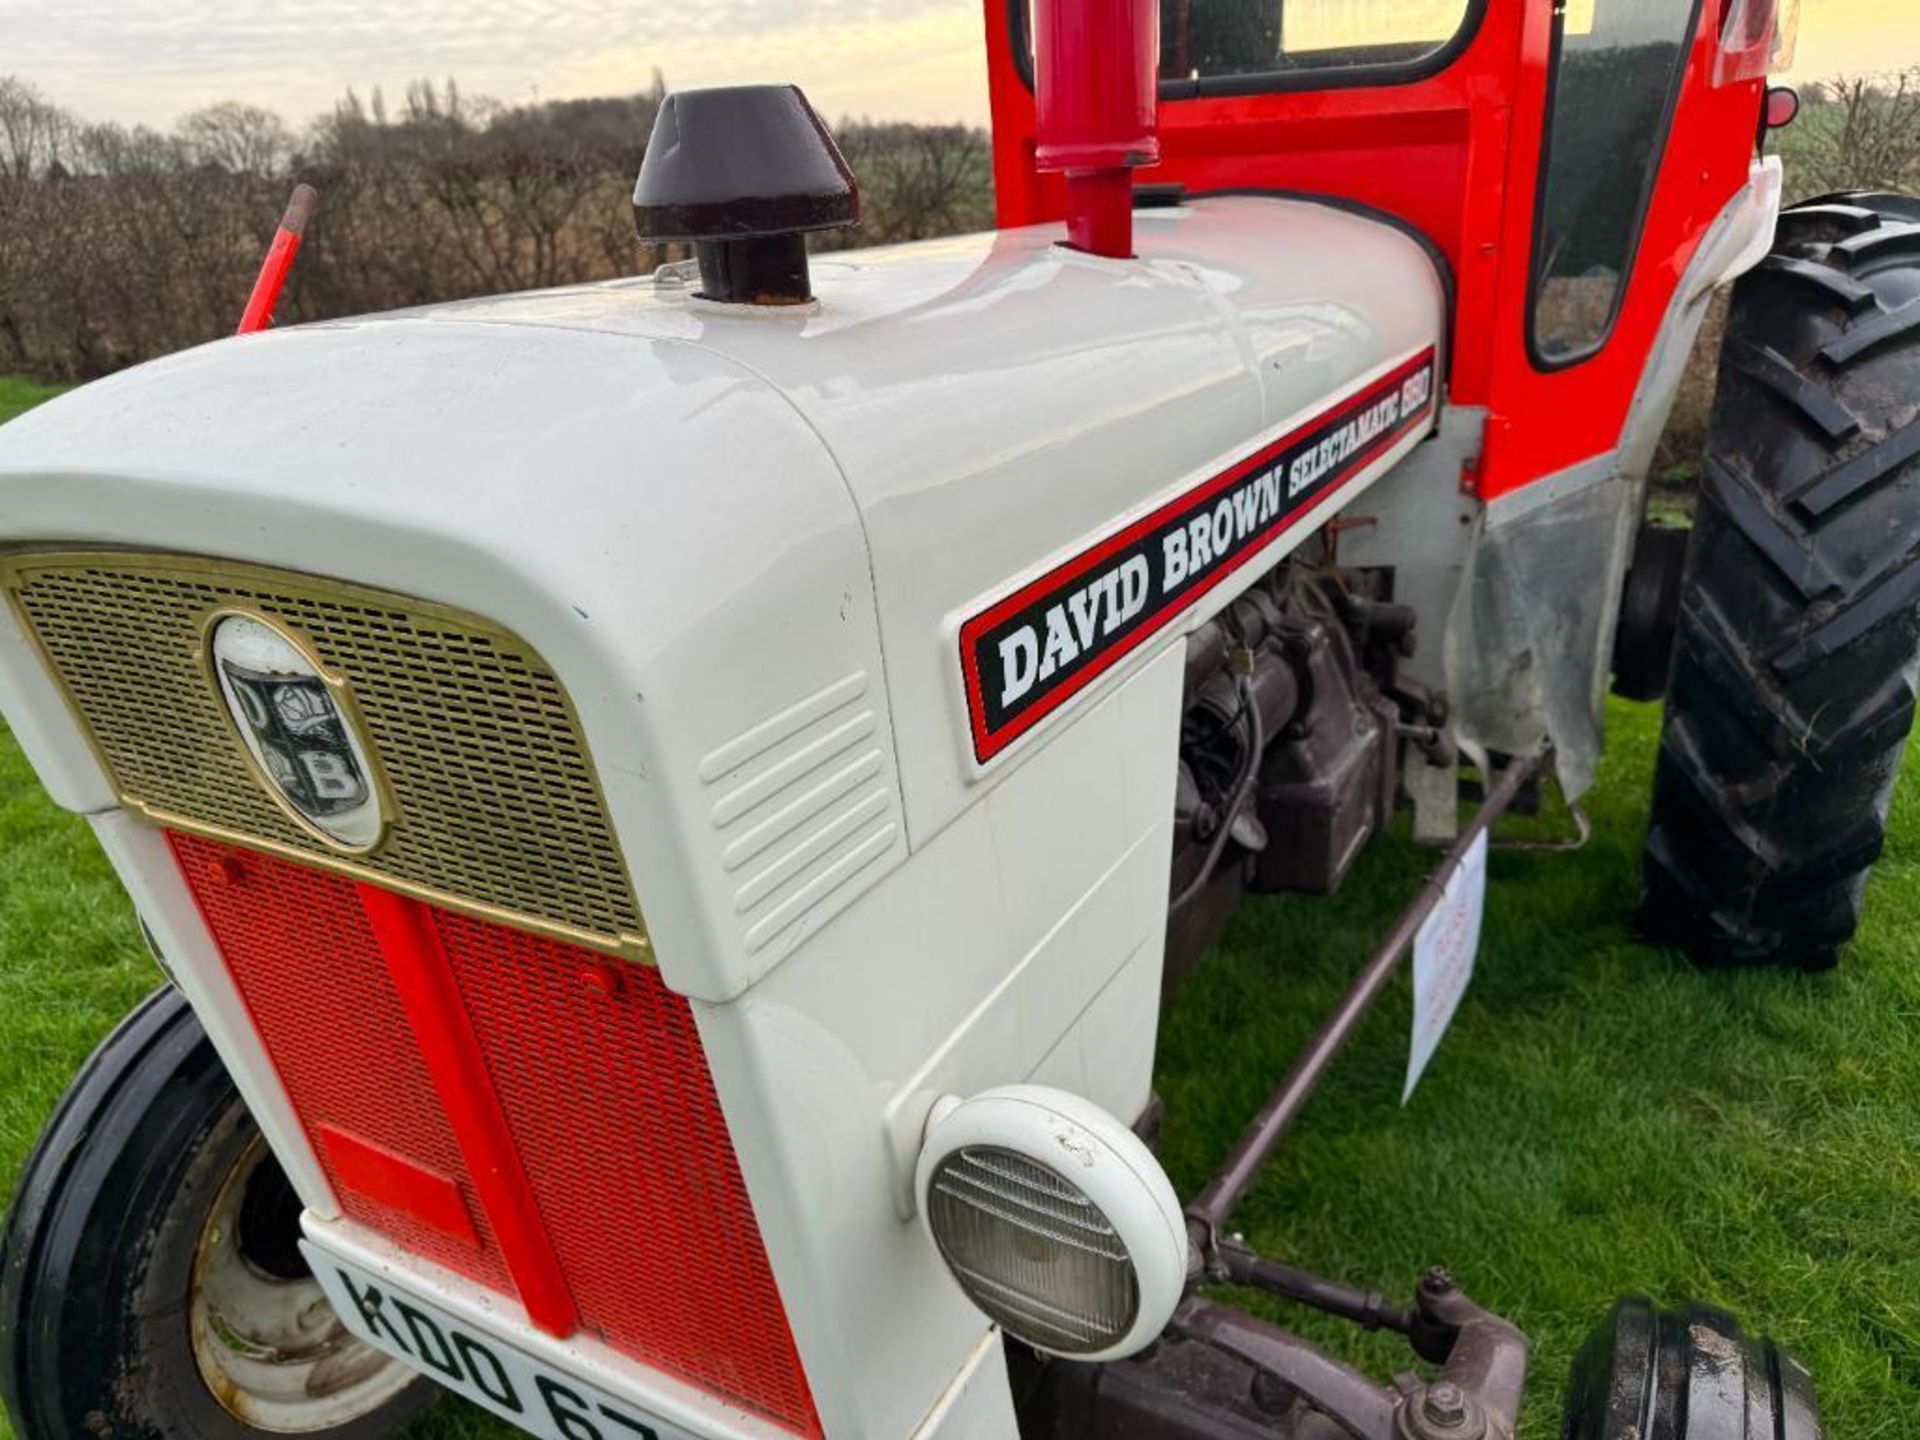 1968 David Brown 880 Selectamatic 2wd diesel tractor with canvas cab, rear hydraulic valve, PTO, rea - Image 15 of 19